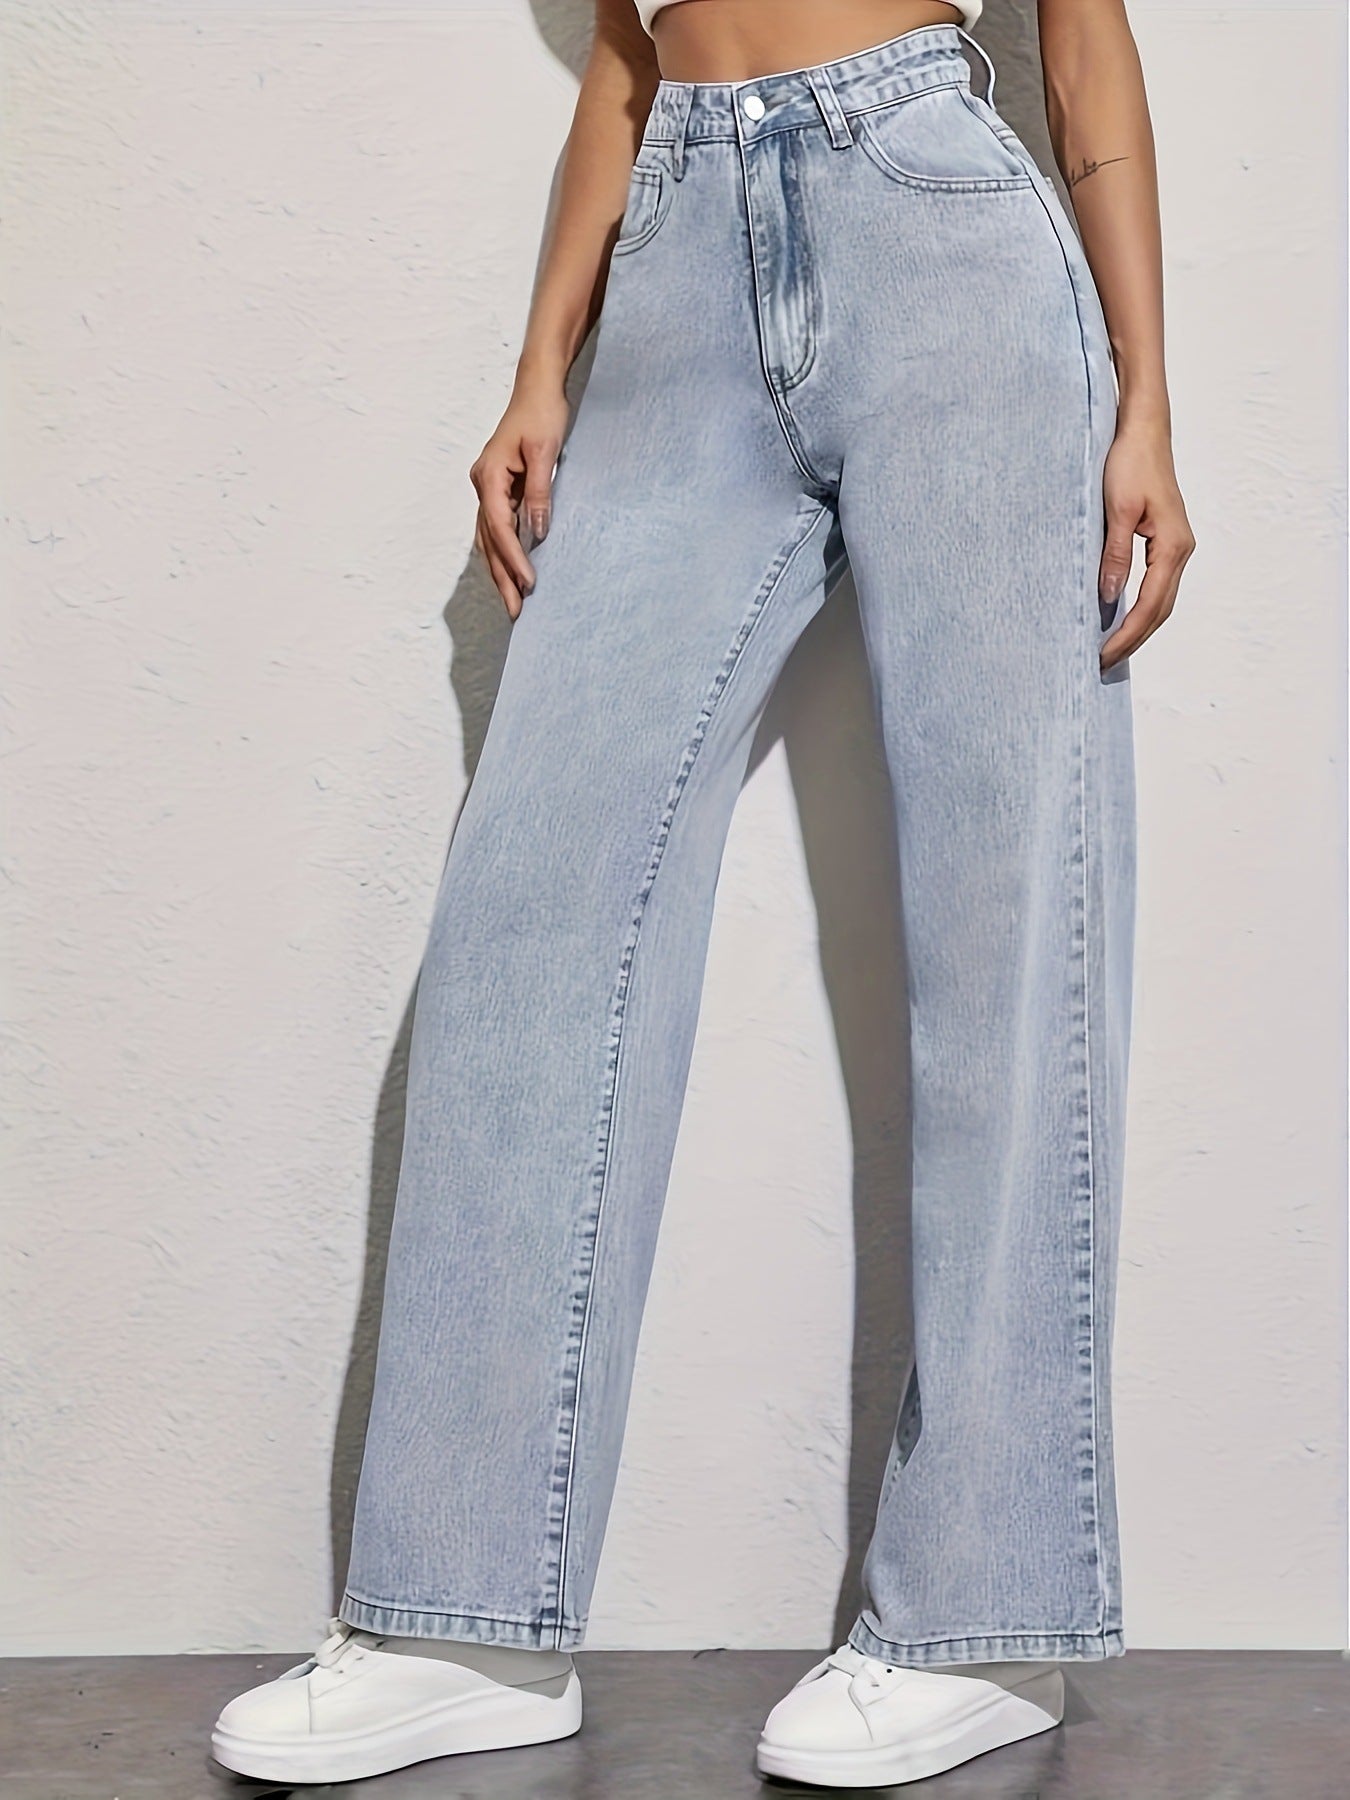 Women's casual jeans loose high-rise, wide-leg trousers